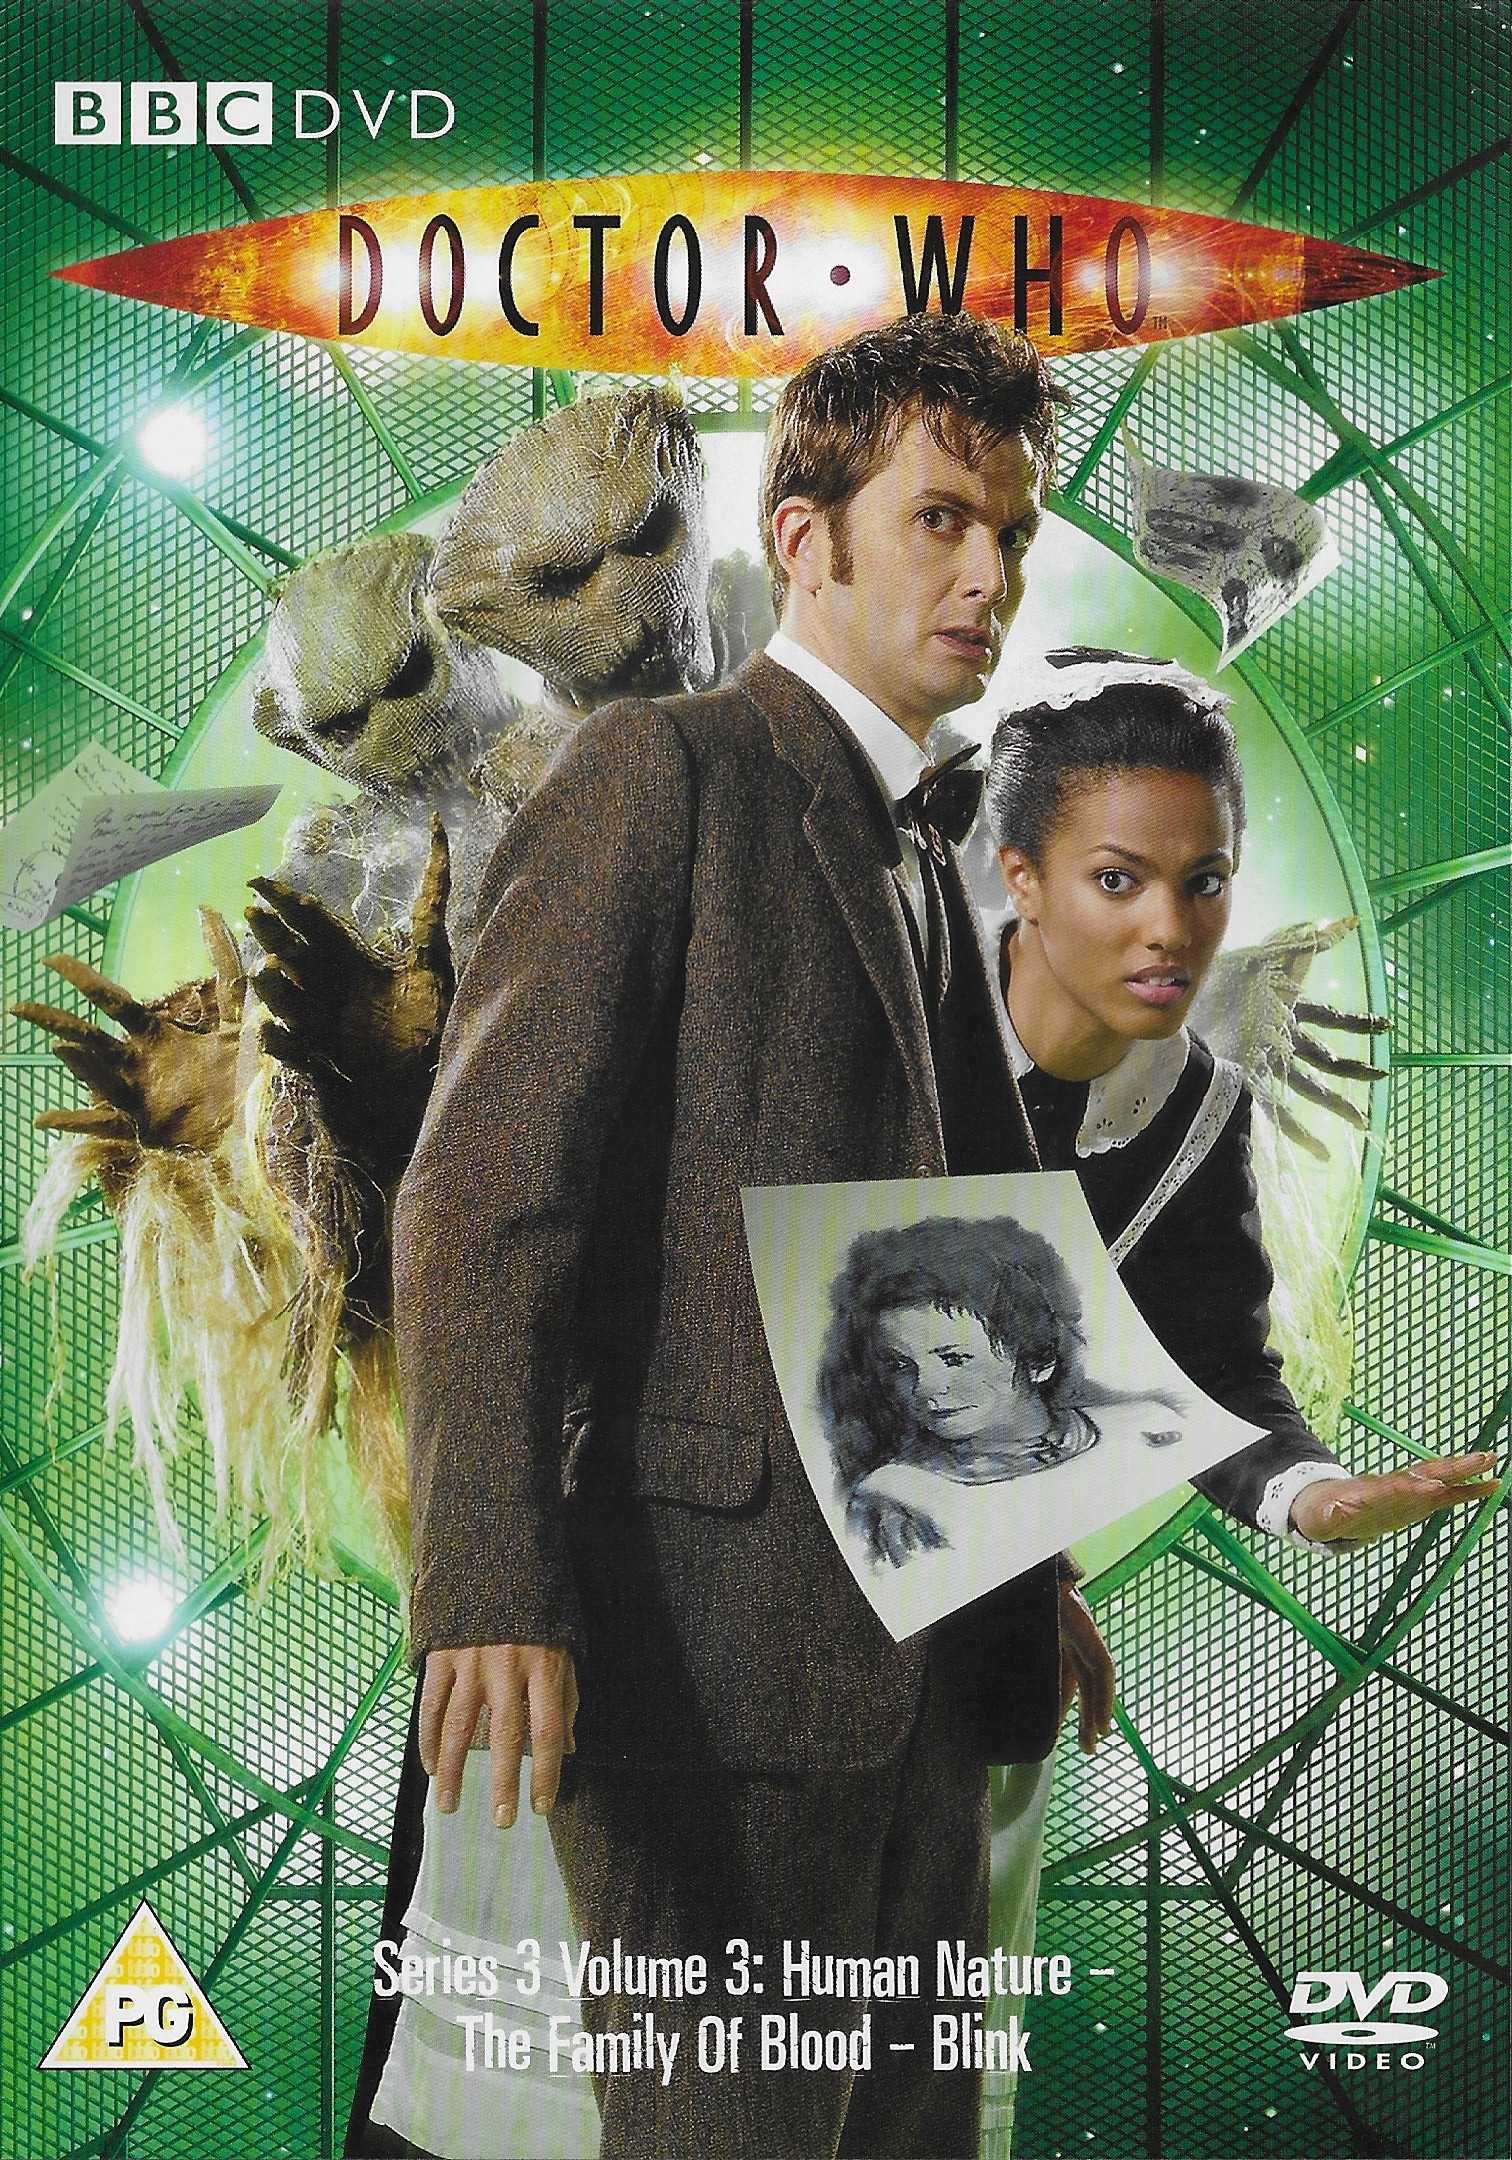 Picture of BBCDVD 2383 Doctor Who - Series 3, volume 3 by artist Paul Cornell / Steven Moffat from the BBC records and Tapes library